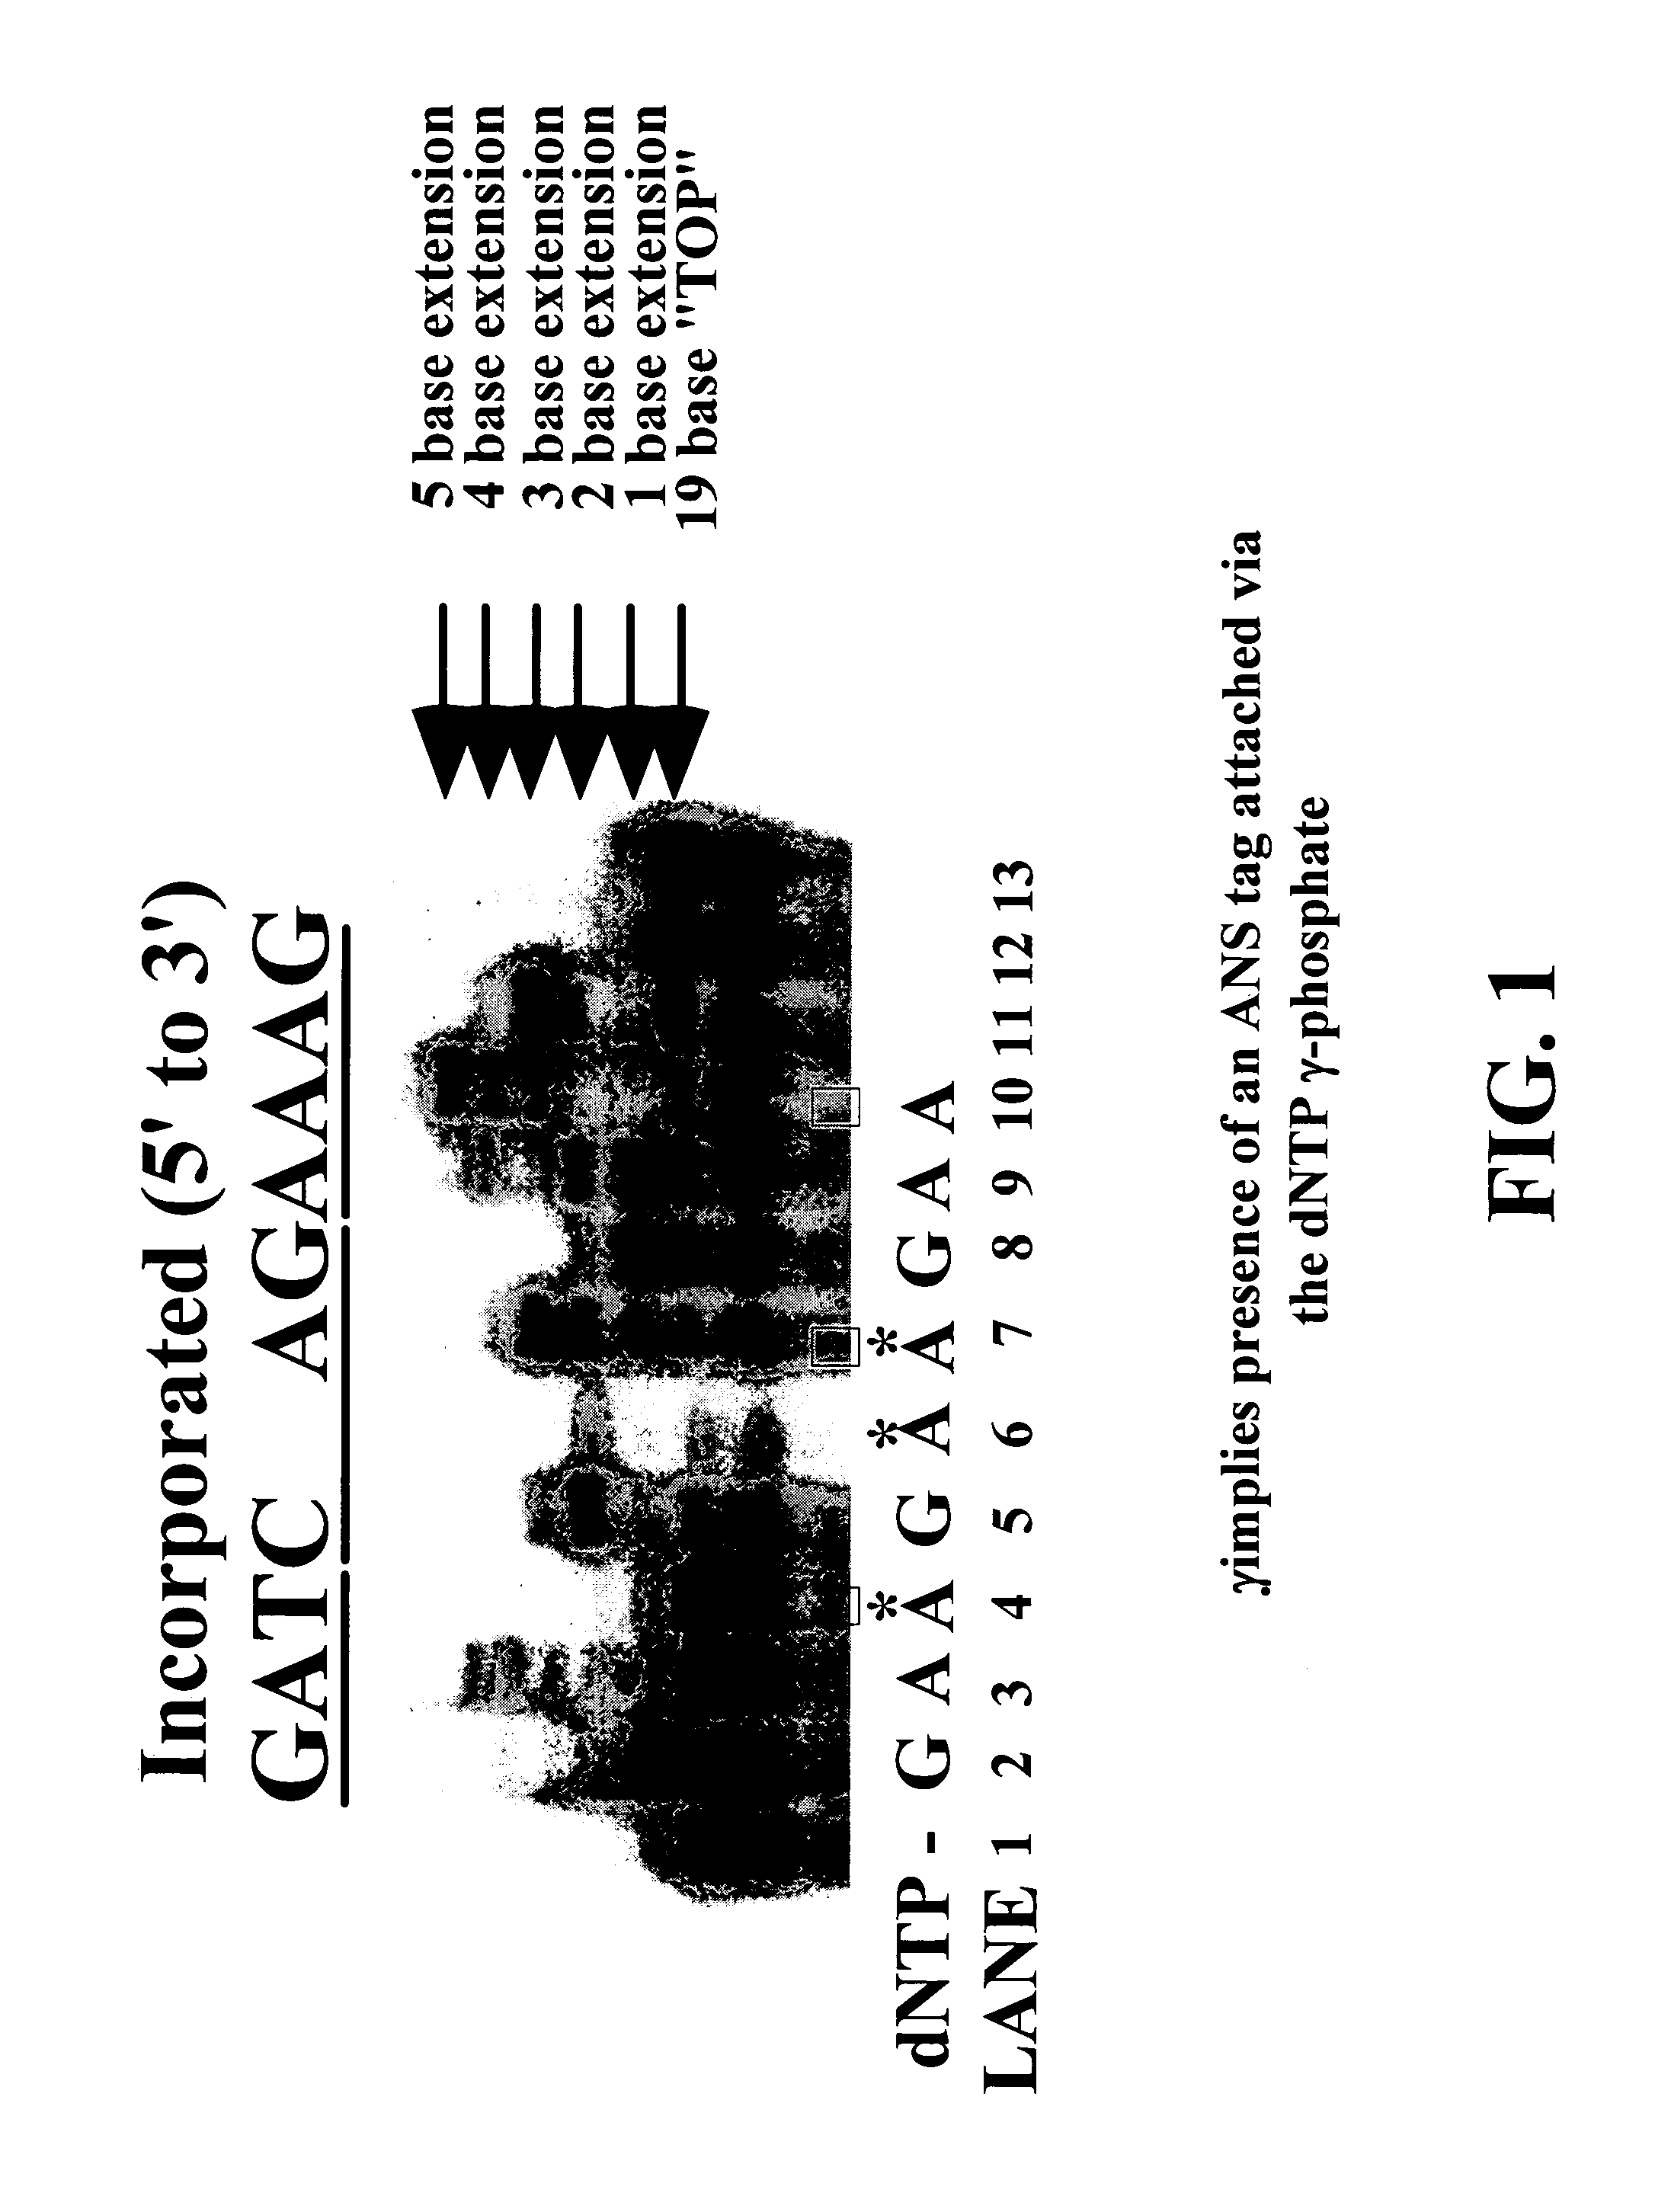 Enzymatic nucleic acid synthesis: compositions and methods for altering monomer incorporation fidelity